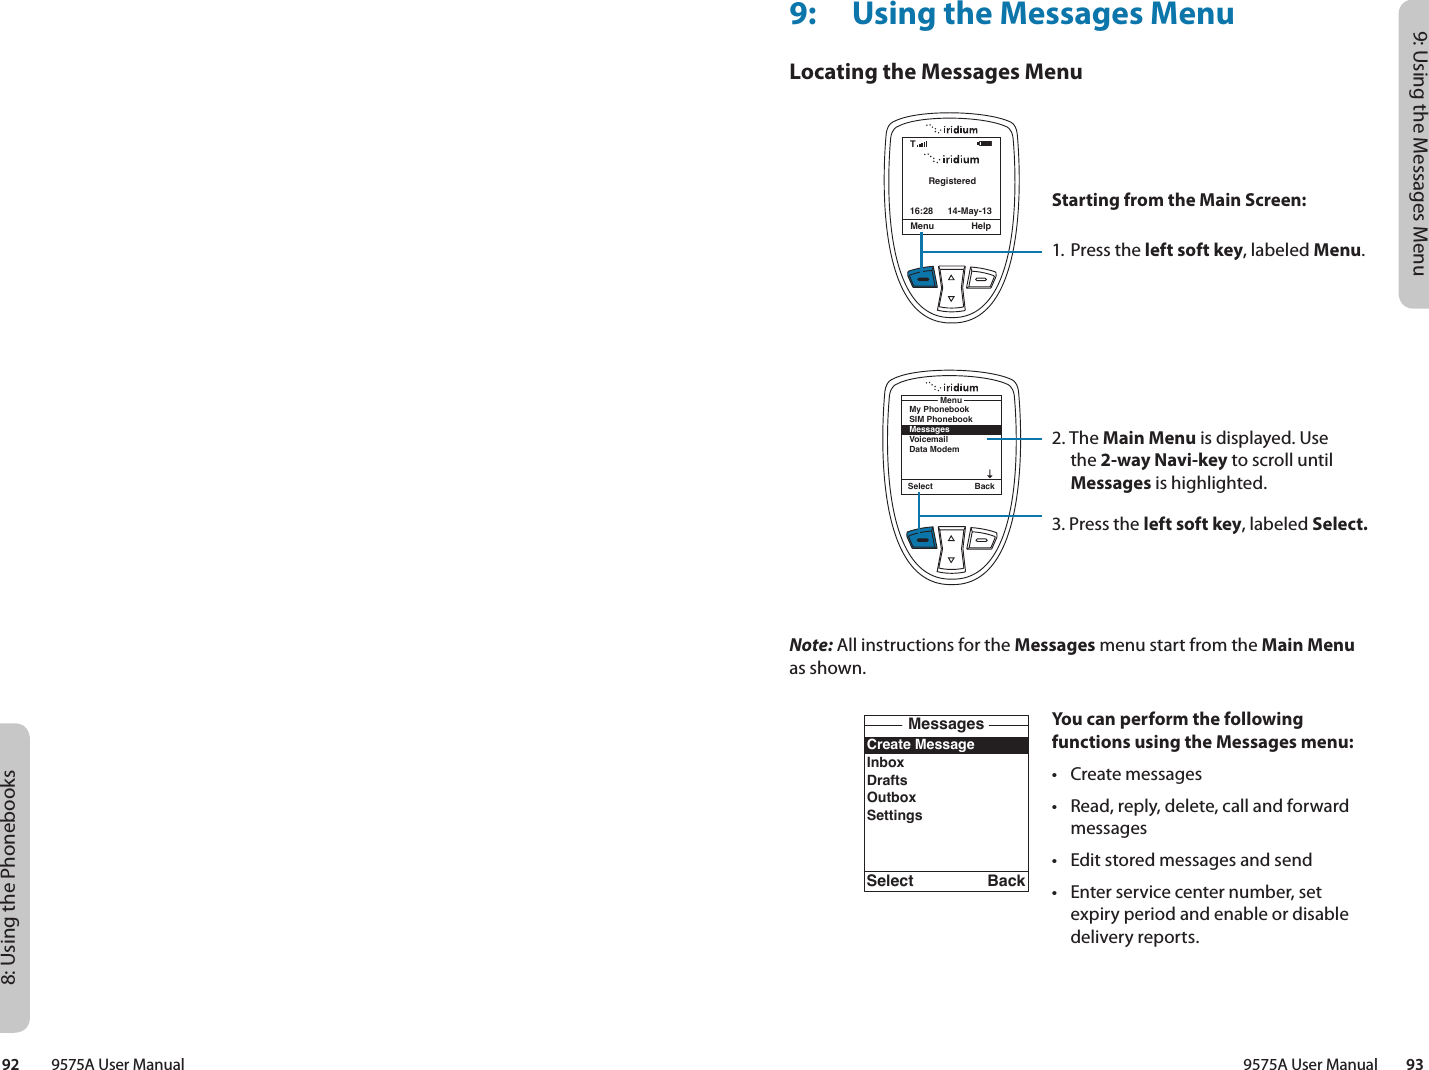 9: Using the Messages Menu9575A User Manual        938: Using the Phonebooks92         9575A User Manual9:  Using the Messages MenuLocating the Messages MenuNote: All instructions for the Messages menu start from the Main Menu as shown.RegisteredMenu Help16:28 14-May-13TCreate MessageInboxDraftsOutboxSettingsMessagesSelect BackSelect BackMy PhonebookSIM PhonebookMessagesVoicemailData ModemMenuStarting from the Main Screen:1. Press the left soft key, labeled Menu.2. The Main Menu is displayed. Use the 2-way Navi-key to scroll until Messages is highlighted.3. Press the left soft key, labeled Select.You can perform the following functions using the Messages menu:•  Create messages•  Read, reply, delete, call and forward messages•  Edit stored messages and send•  Enter service center number, set expiry period and enable or disable delivery reports.